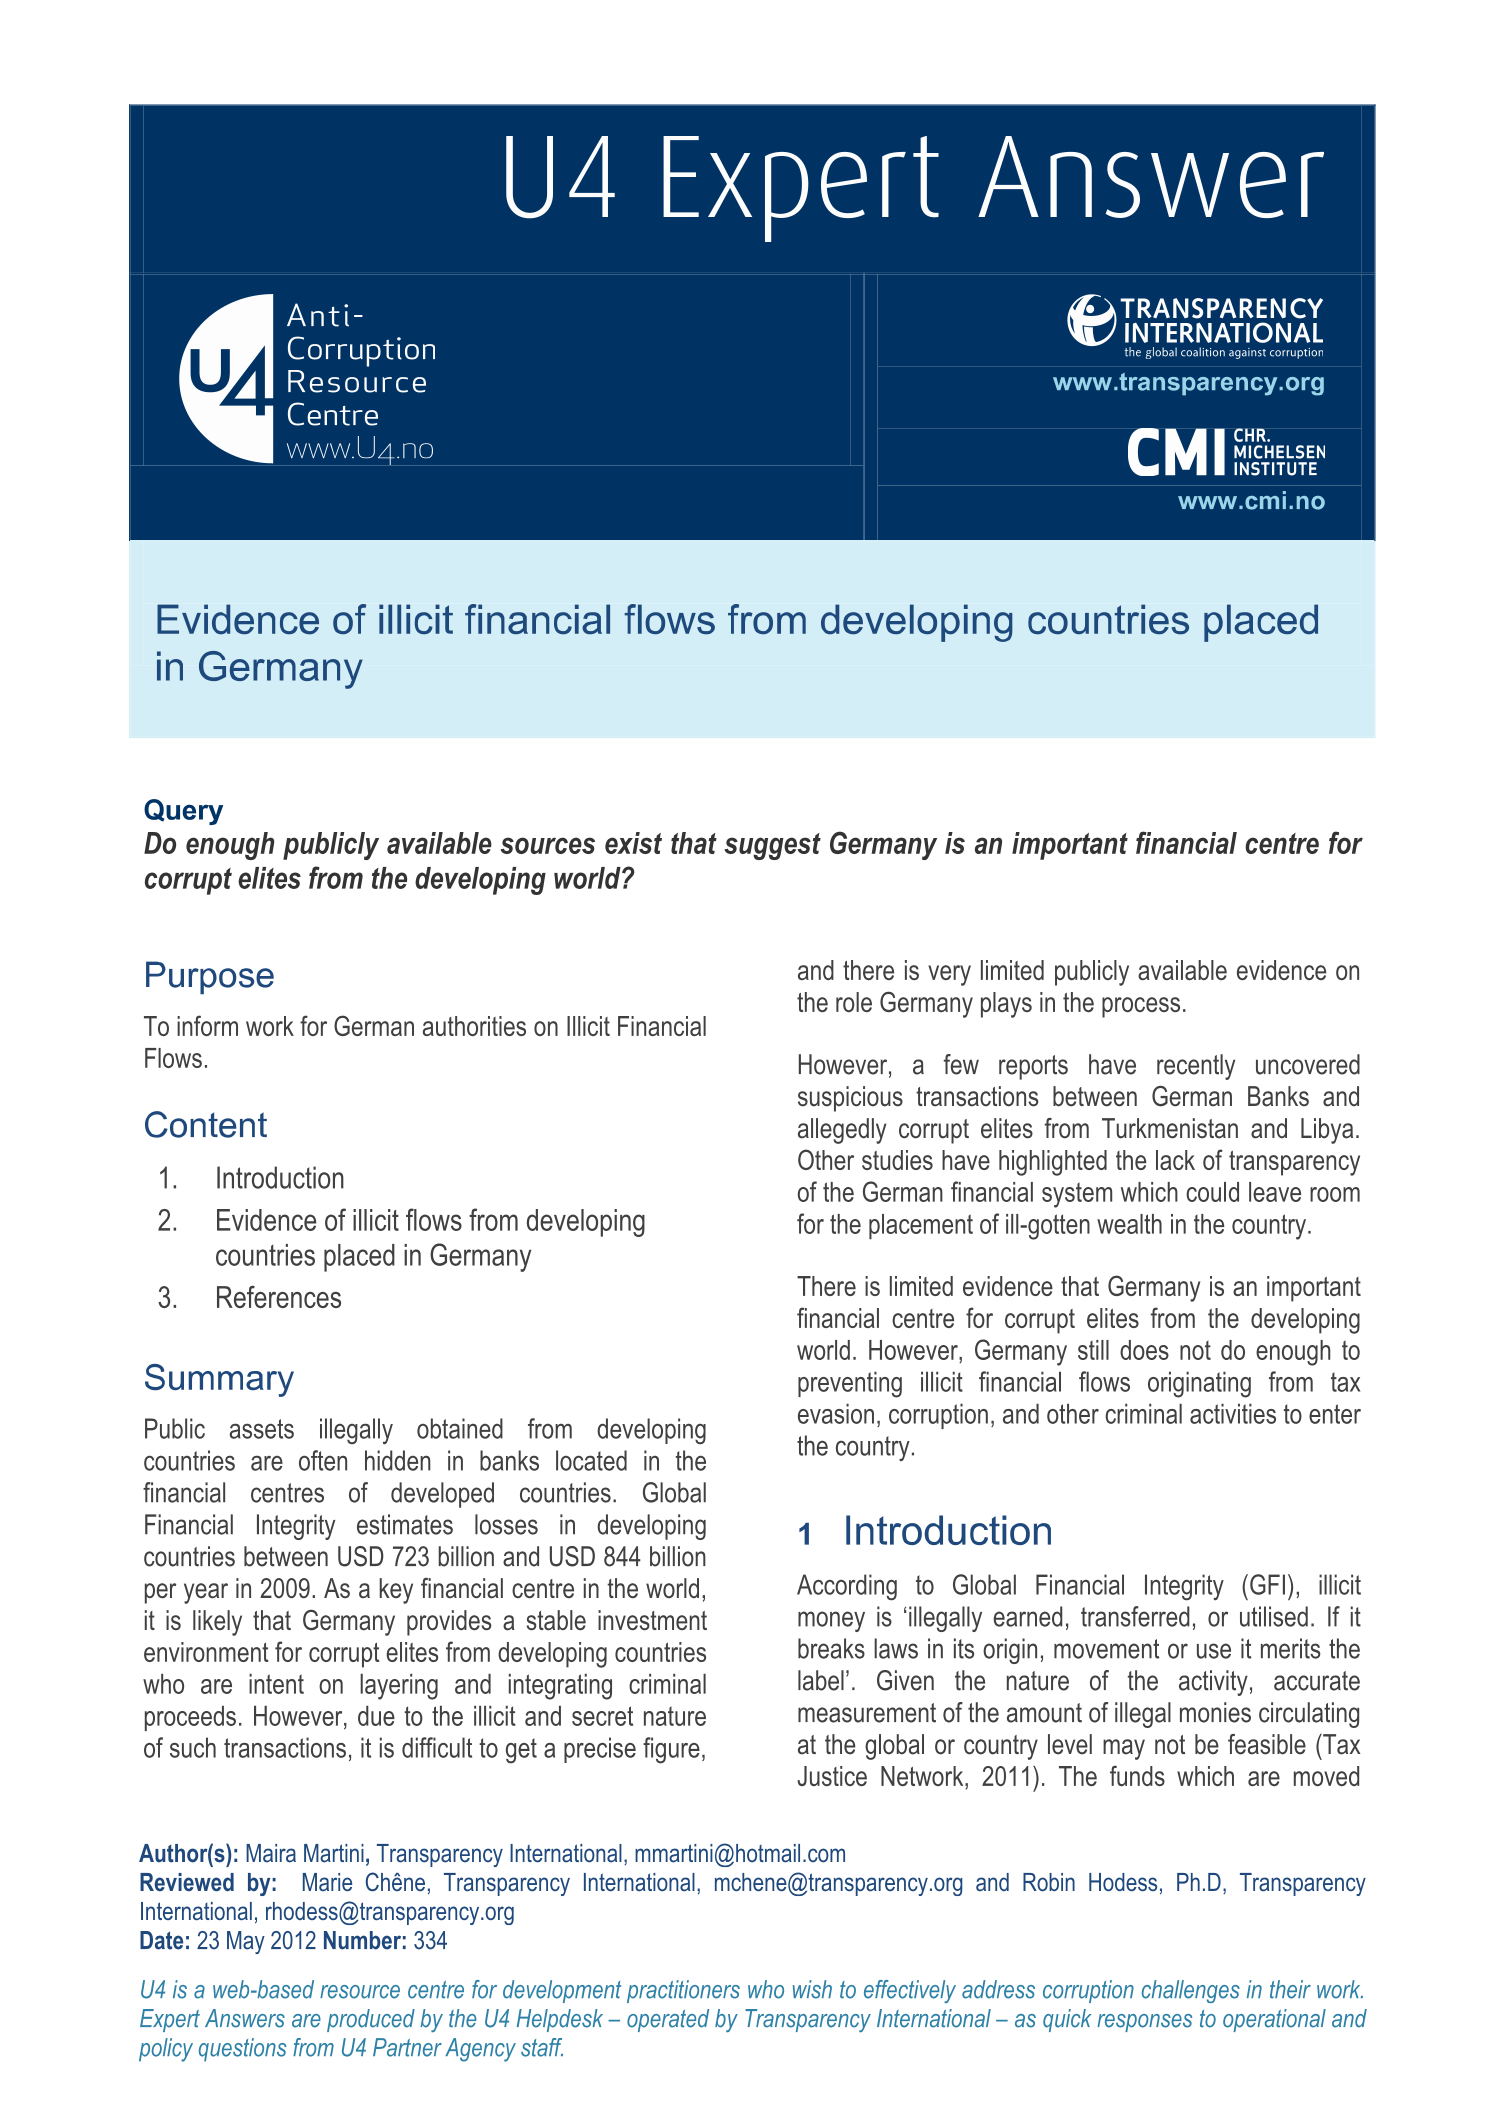 Evidence of illicit financial flows from developing countries placed in Germany